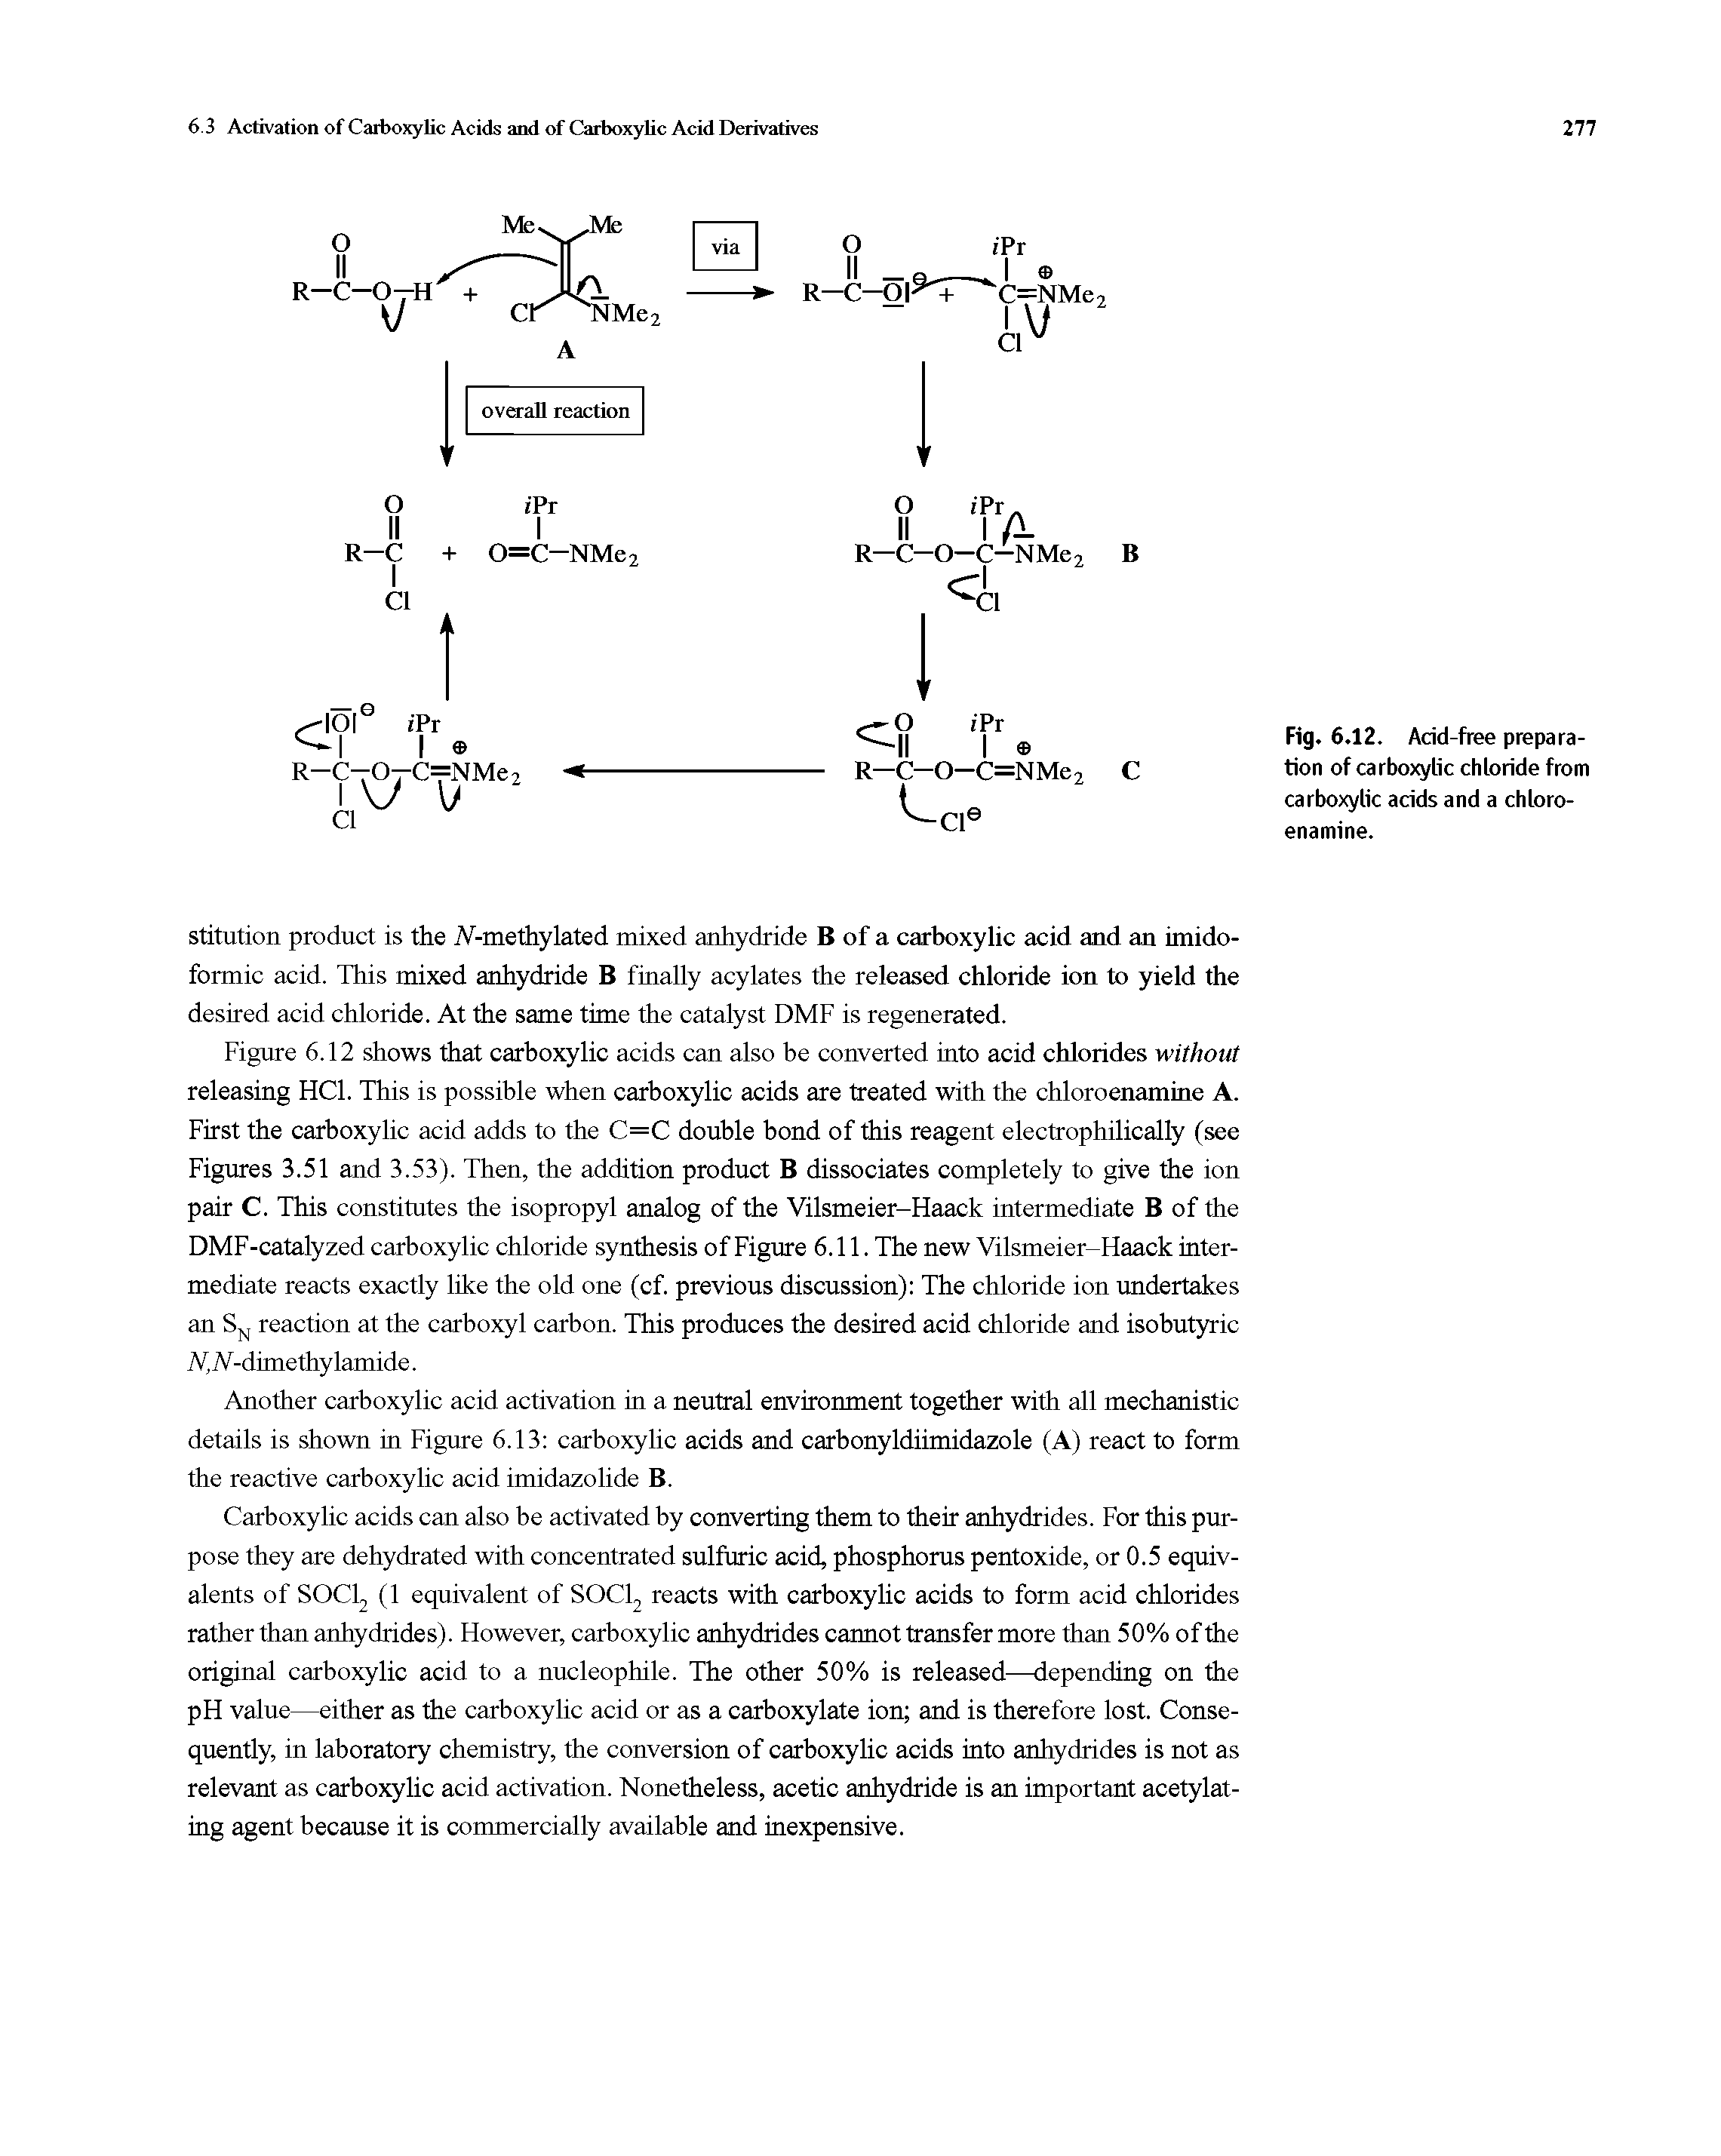 Figure 6.12 shows that carboxylic acids can also be converted into acid chlorides without releasing HC1. This is possible when carboxylic acids are treated with the chloroenamine A. First the carboxylic acid adds to the C=C double bond of this reagent electrophilically (see Figures 3.51 and 3.53). Then, the addition product B dissociates completely to give the ion pair C. This constitutes the isopropyl analog of the Vilsmeier-Haack intermediate B of the DMF-catalyzed carboxylic chloride synthesis of Figure 6.11. The new Vilsmeier-Haack intermediate reacts exactly like the old one (cf. previous discussion) The chloride ion undertakes an SN reaction at the carboxyl carbon. This produces the desired acid chloride and isobutyric N, IV-dimethylamide.